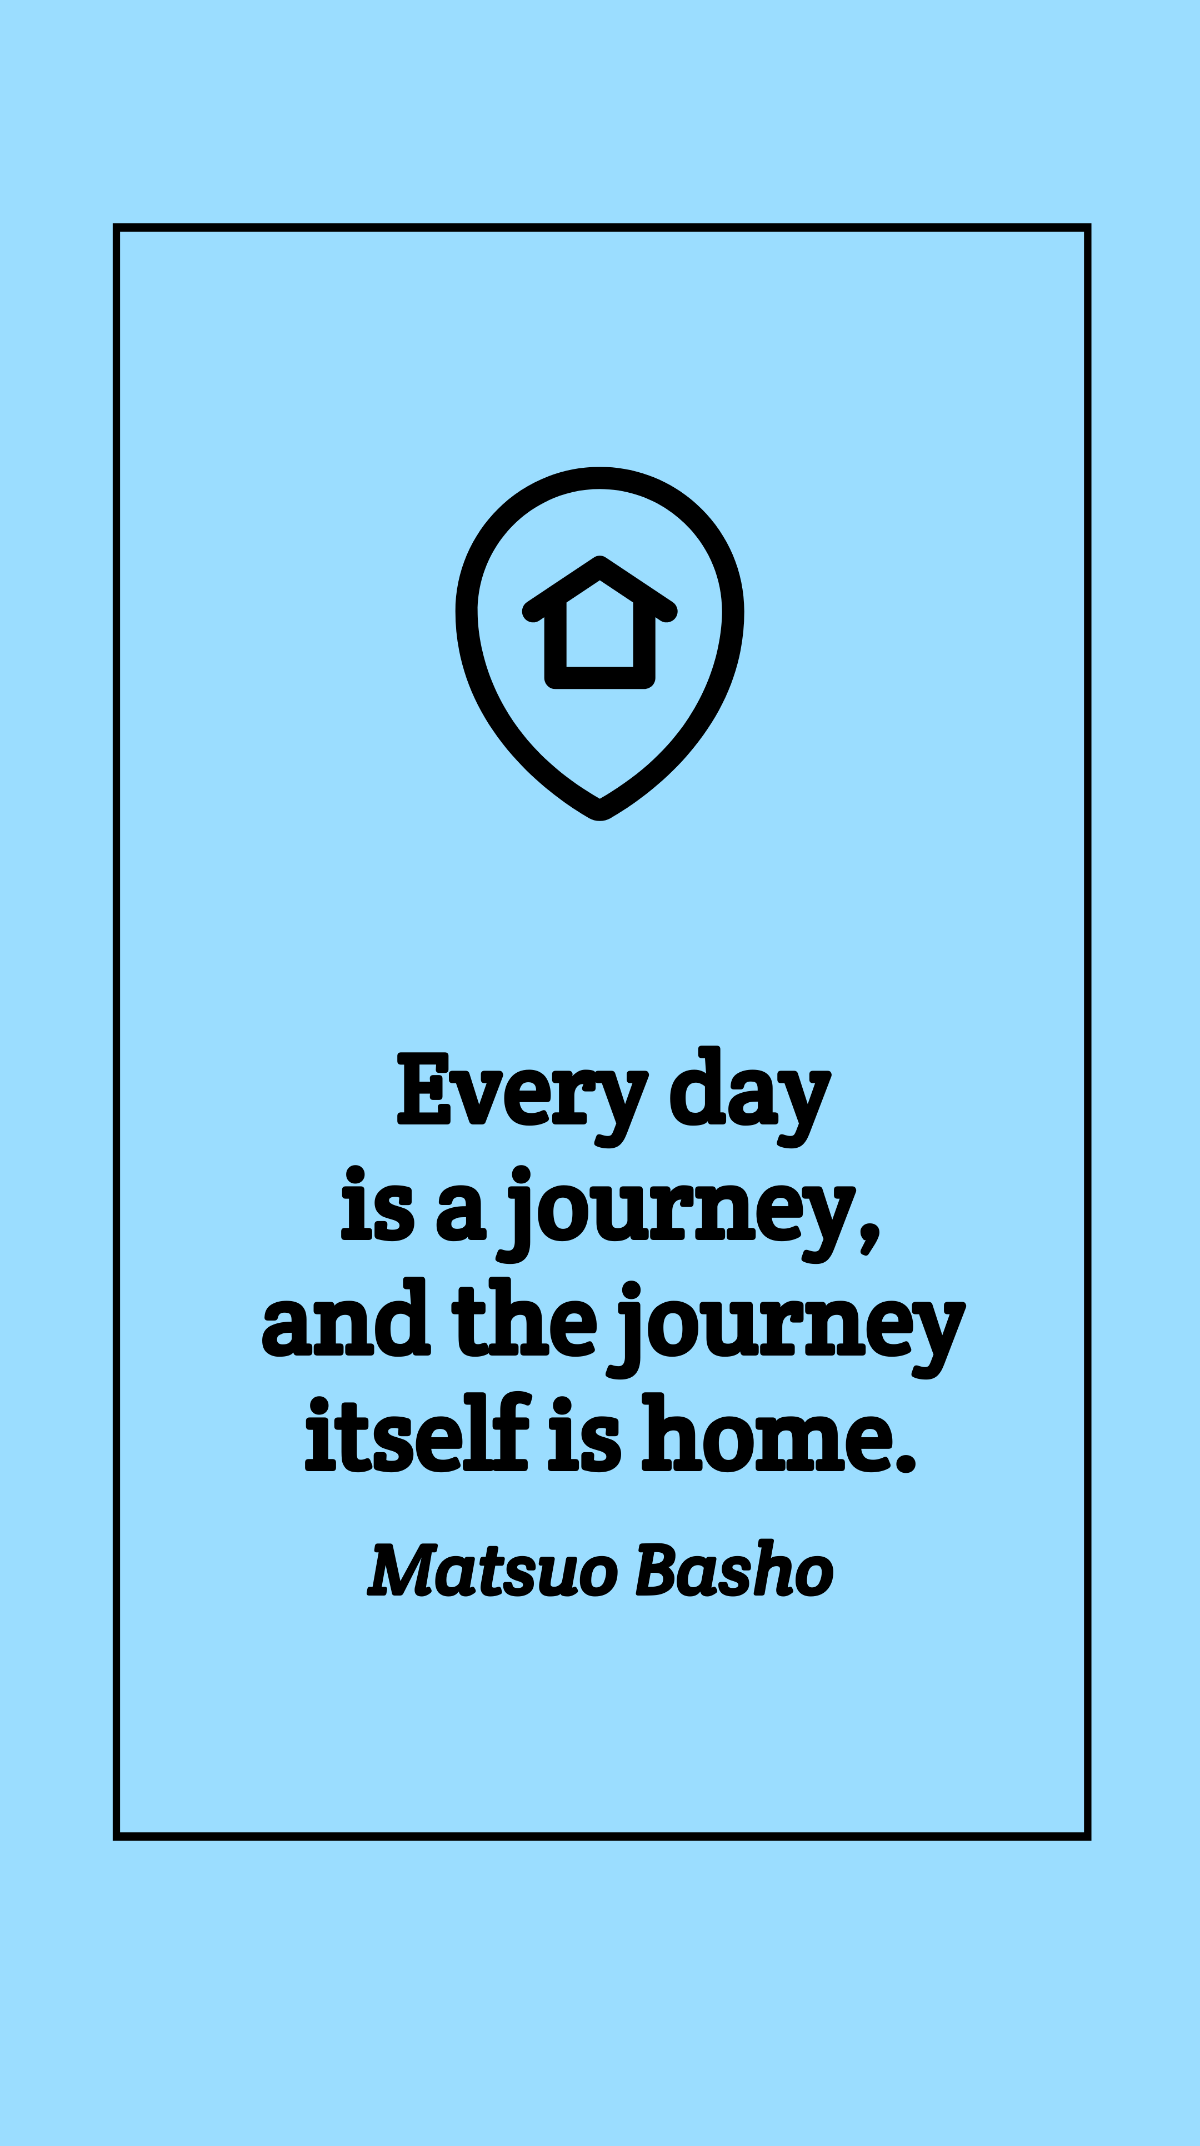 Matsuo Basho - Every day is a journey, and the journey itself is home. Template